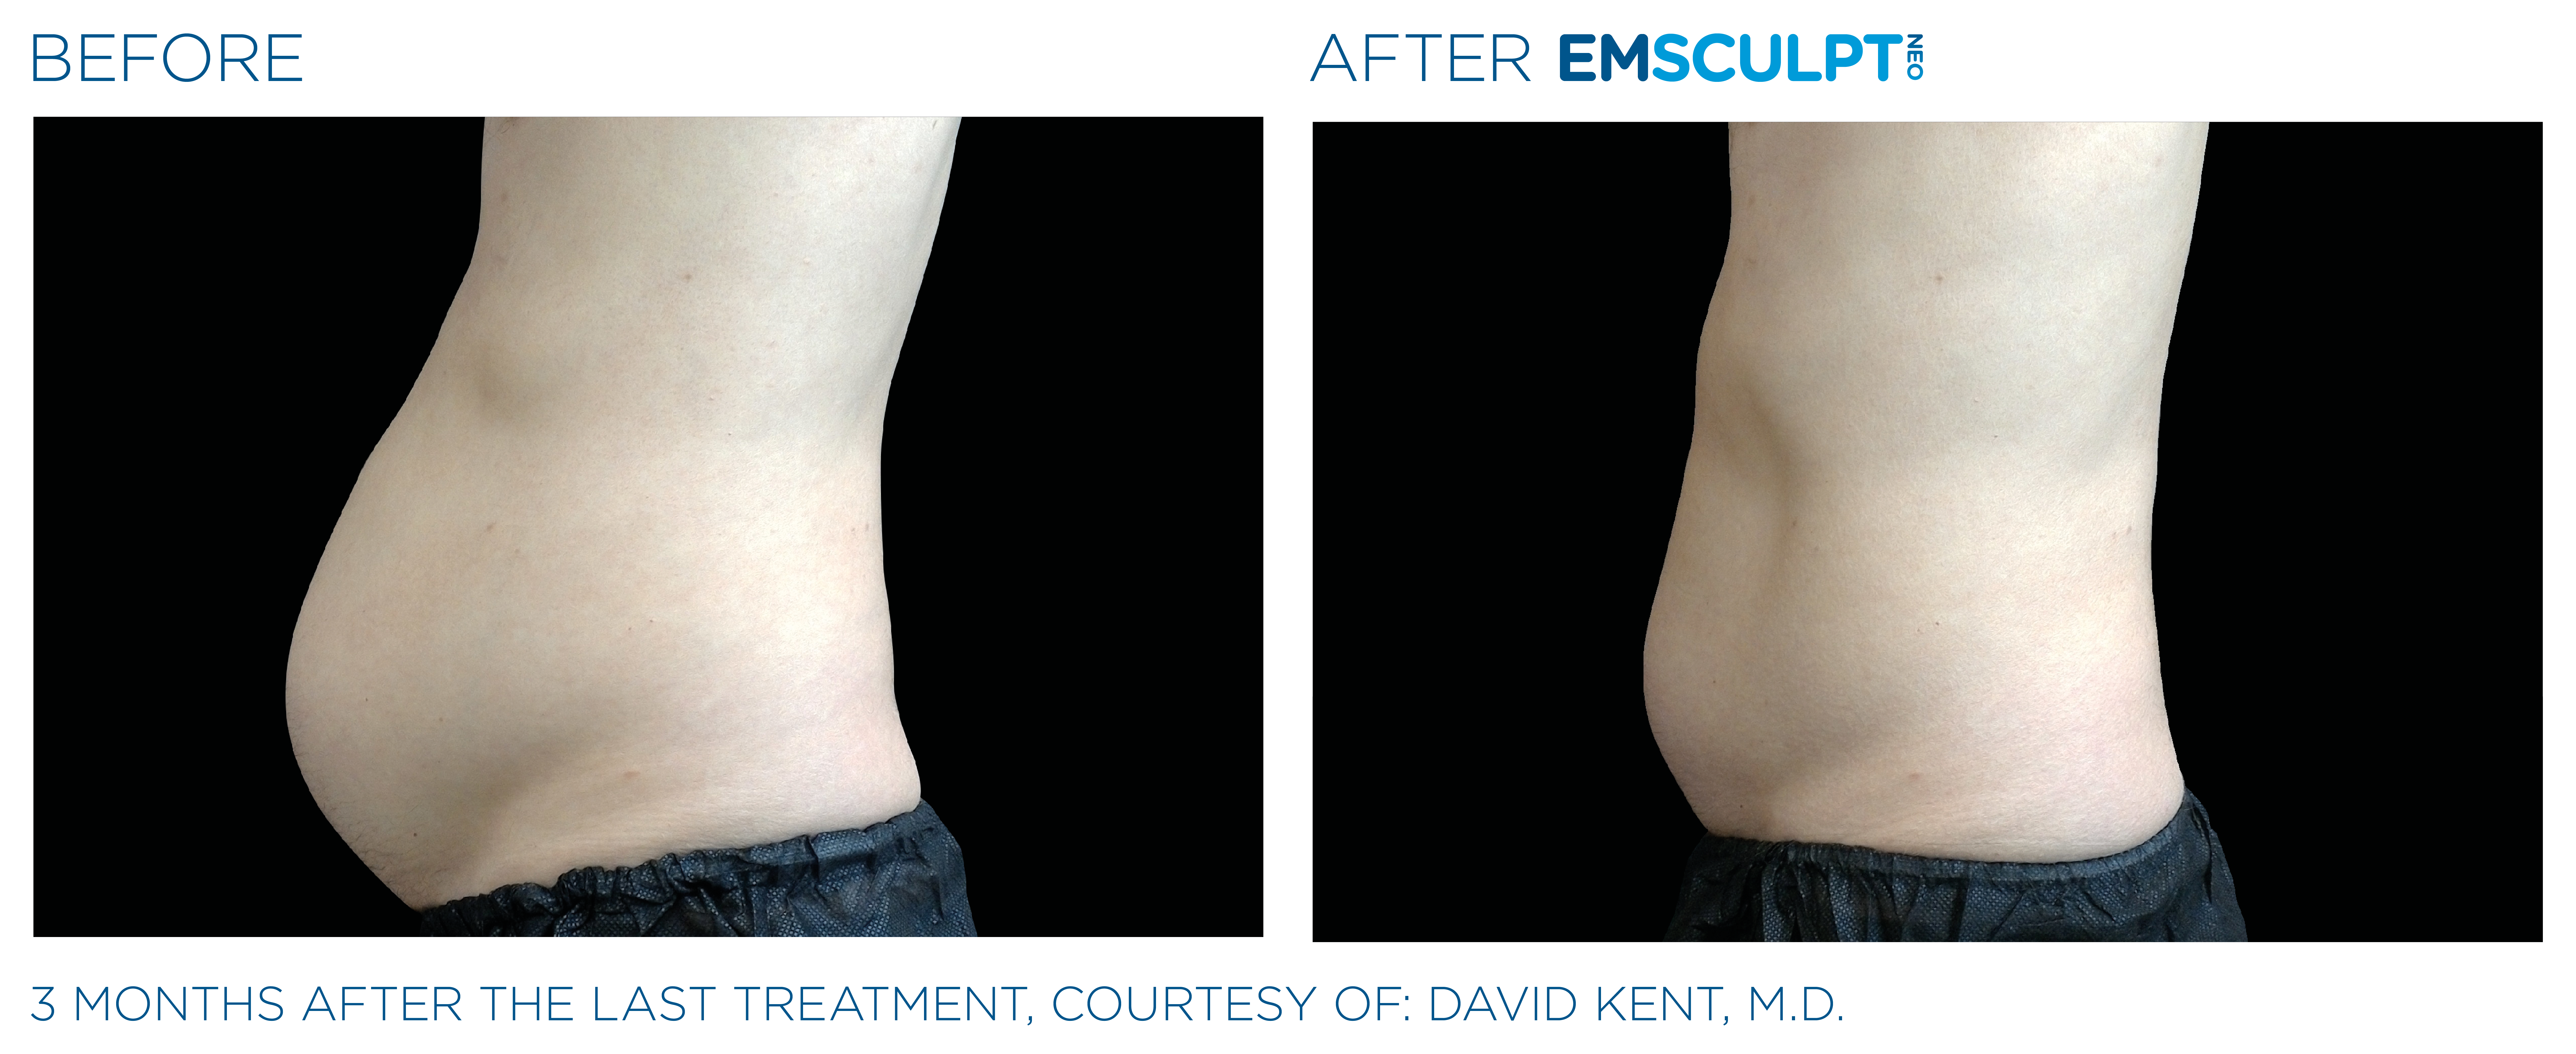 EMSCULPT NEO Before After Pictures Abdomen